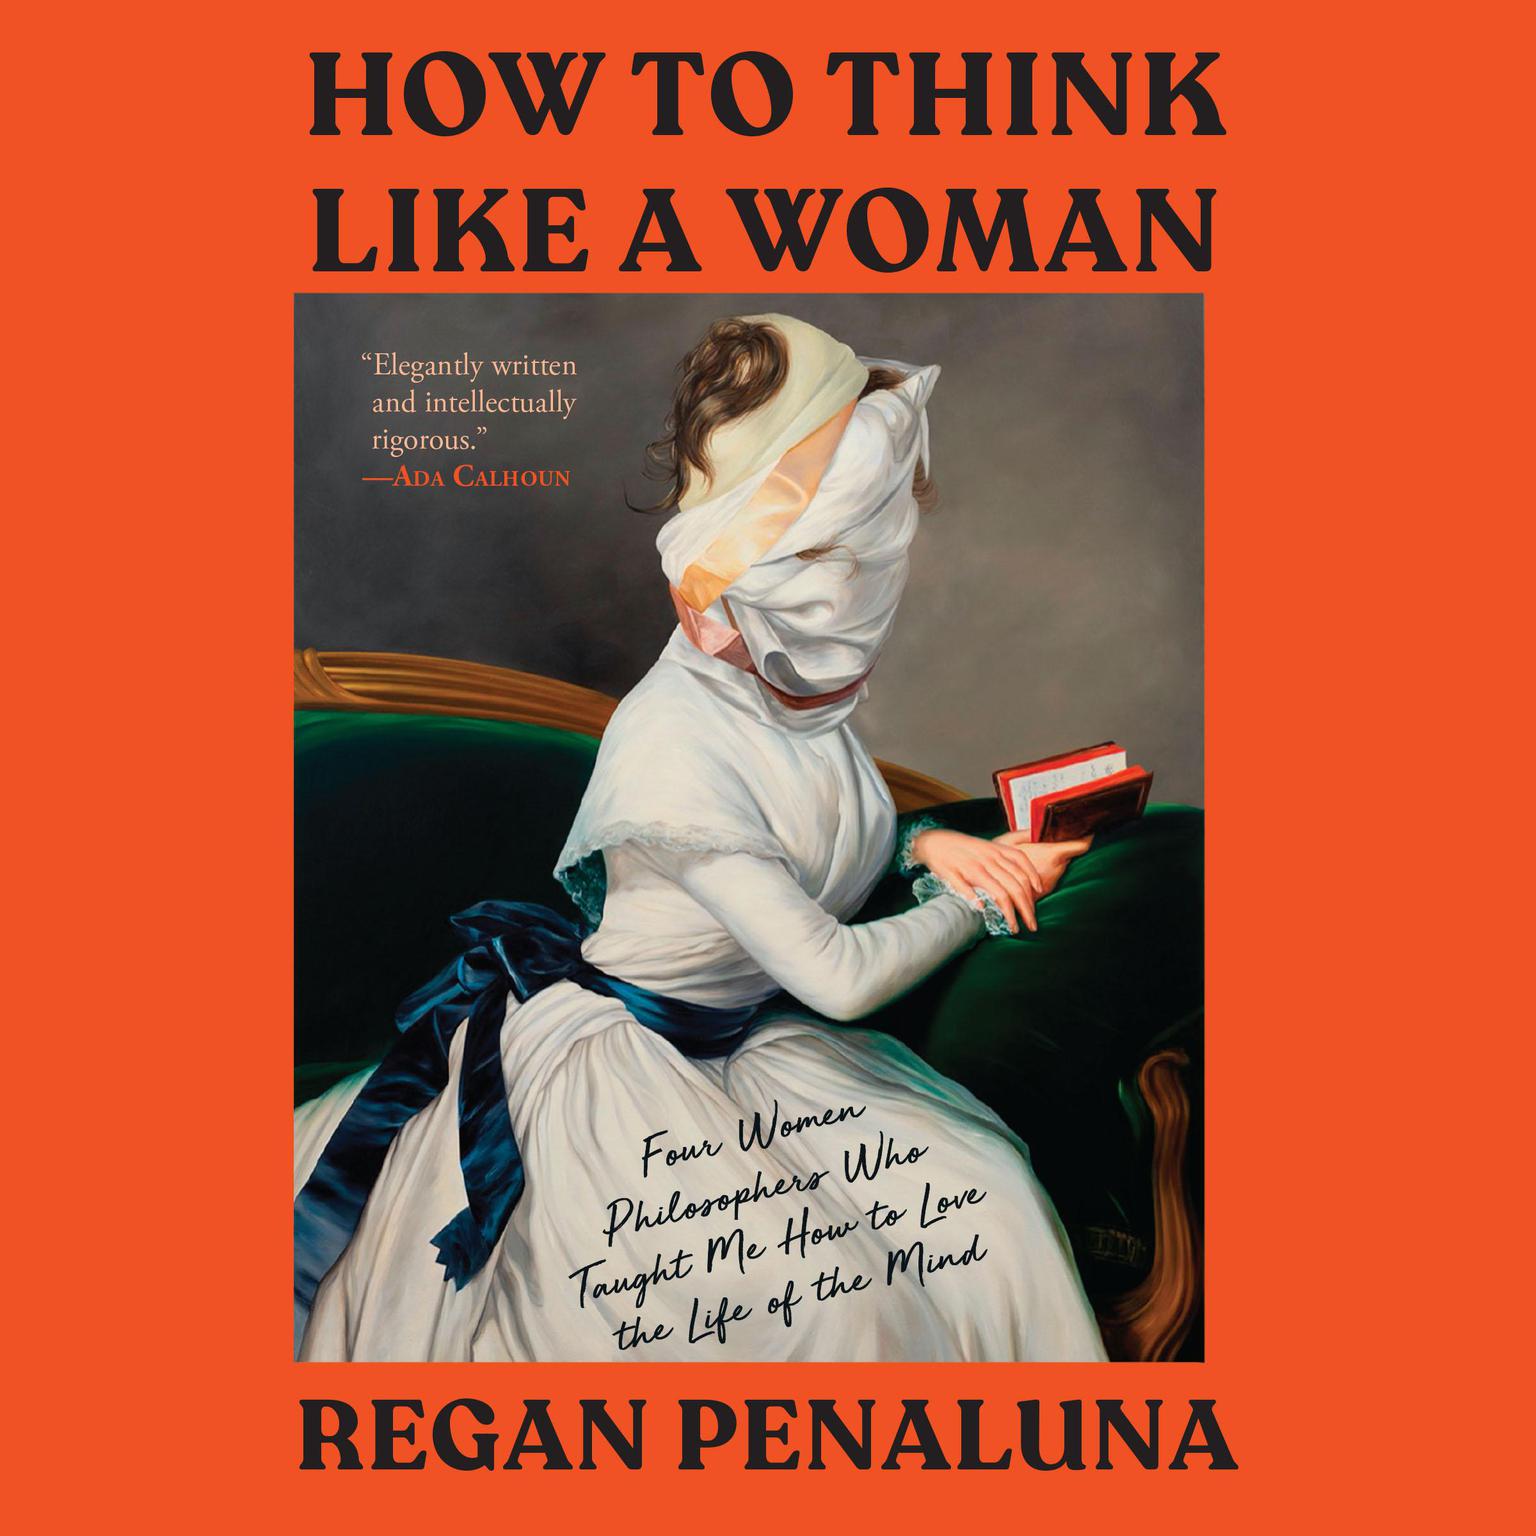 How to Think Like a Woman: Four Women Philosophers Who Taught Me How to Love the Life of the Mind Audiobook, by Regan Penaluna